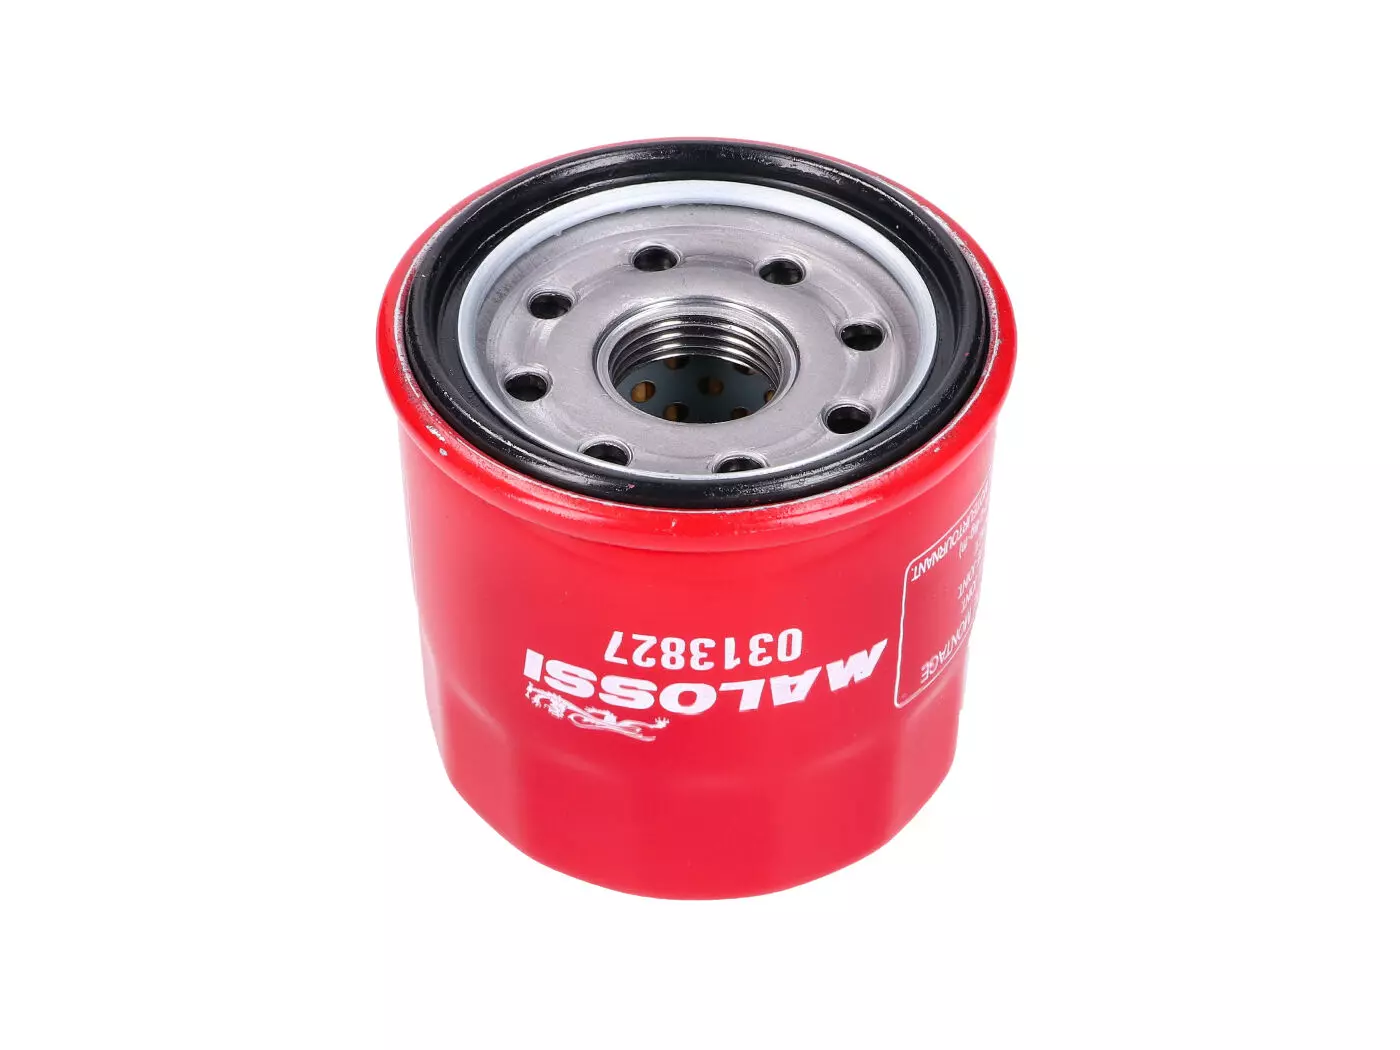 Oliefilter Malossi Red Chilli voor Honda SH, Forza, Silver Wing, Yamaha T-Max 300-600cc Euro3, Euro4, Euro5